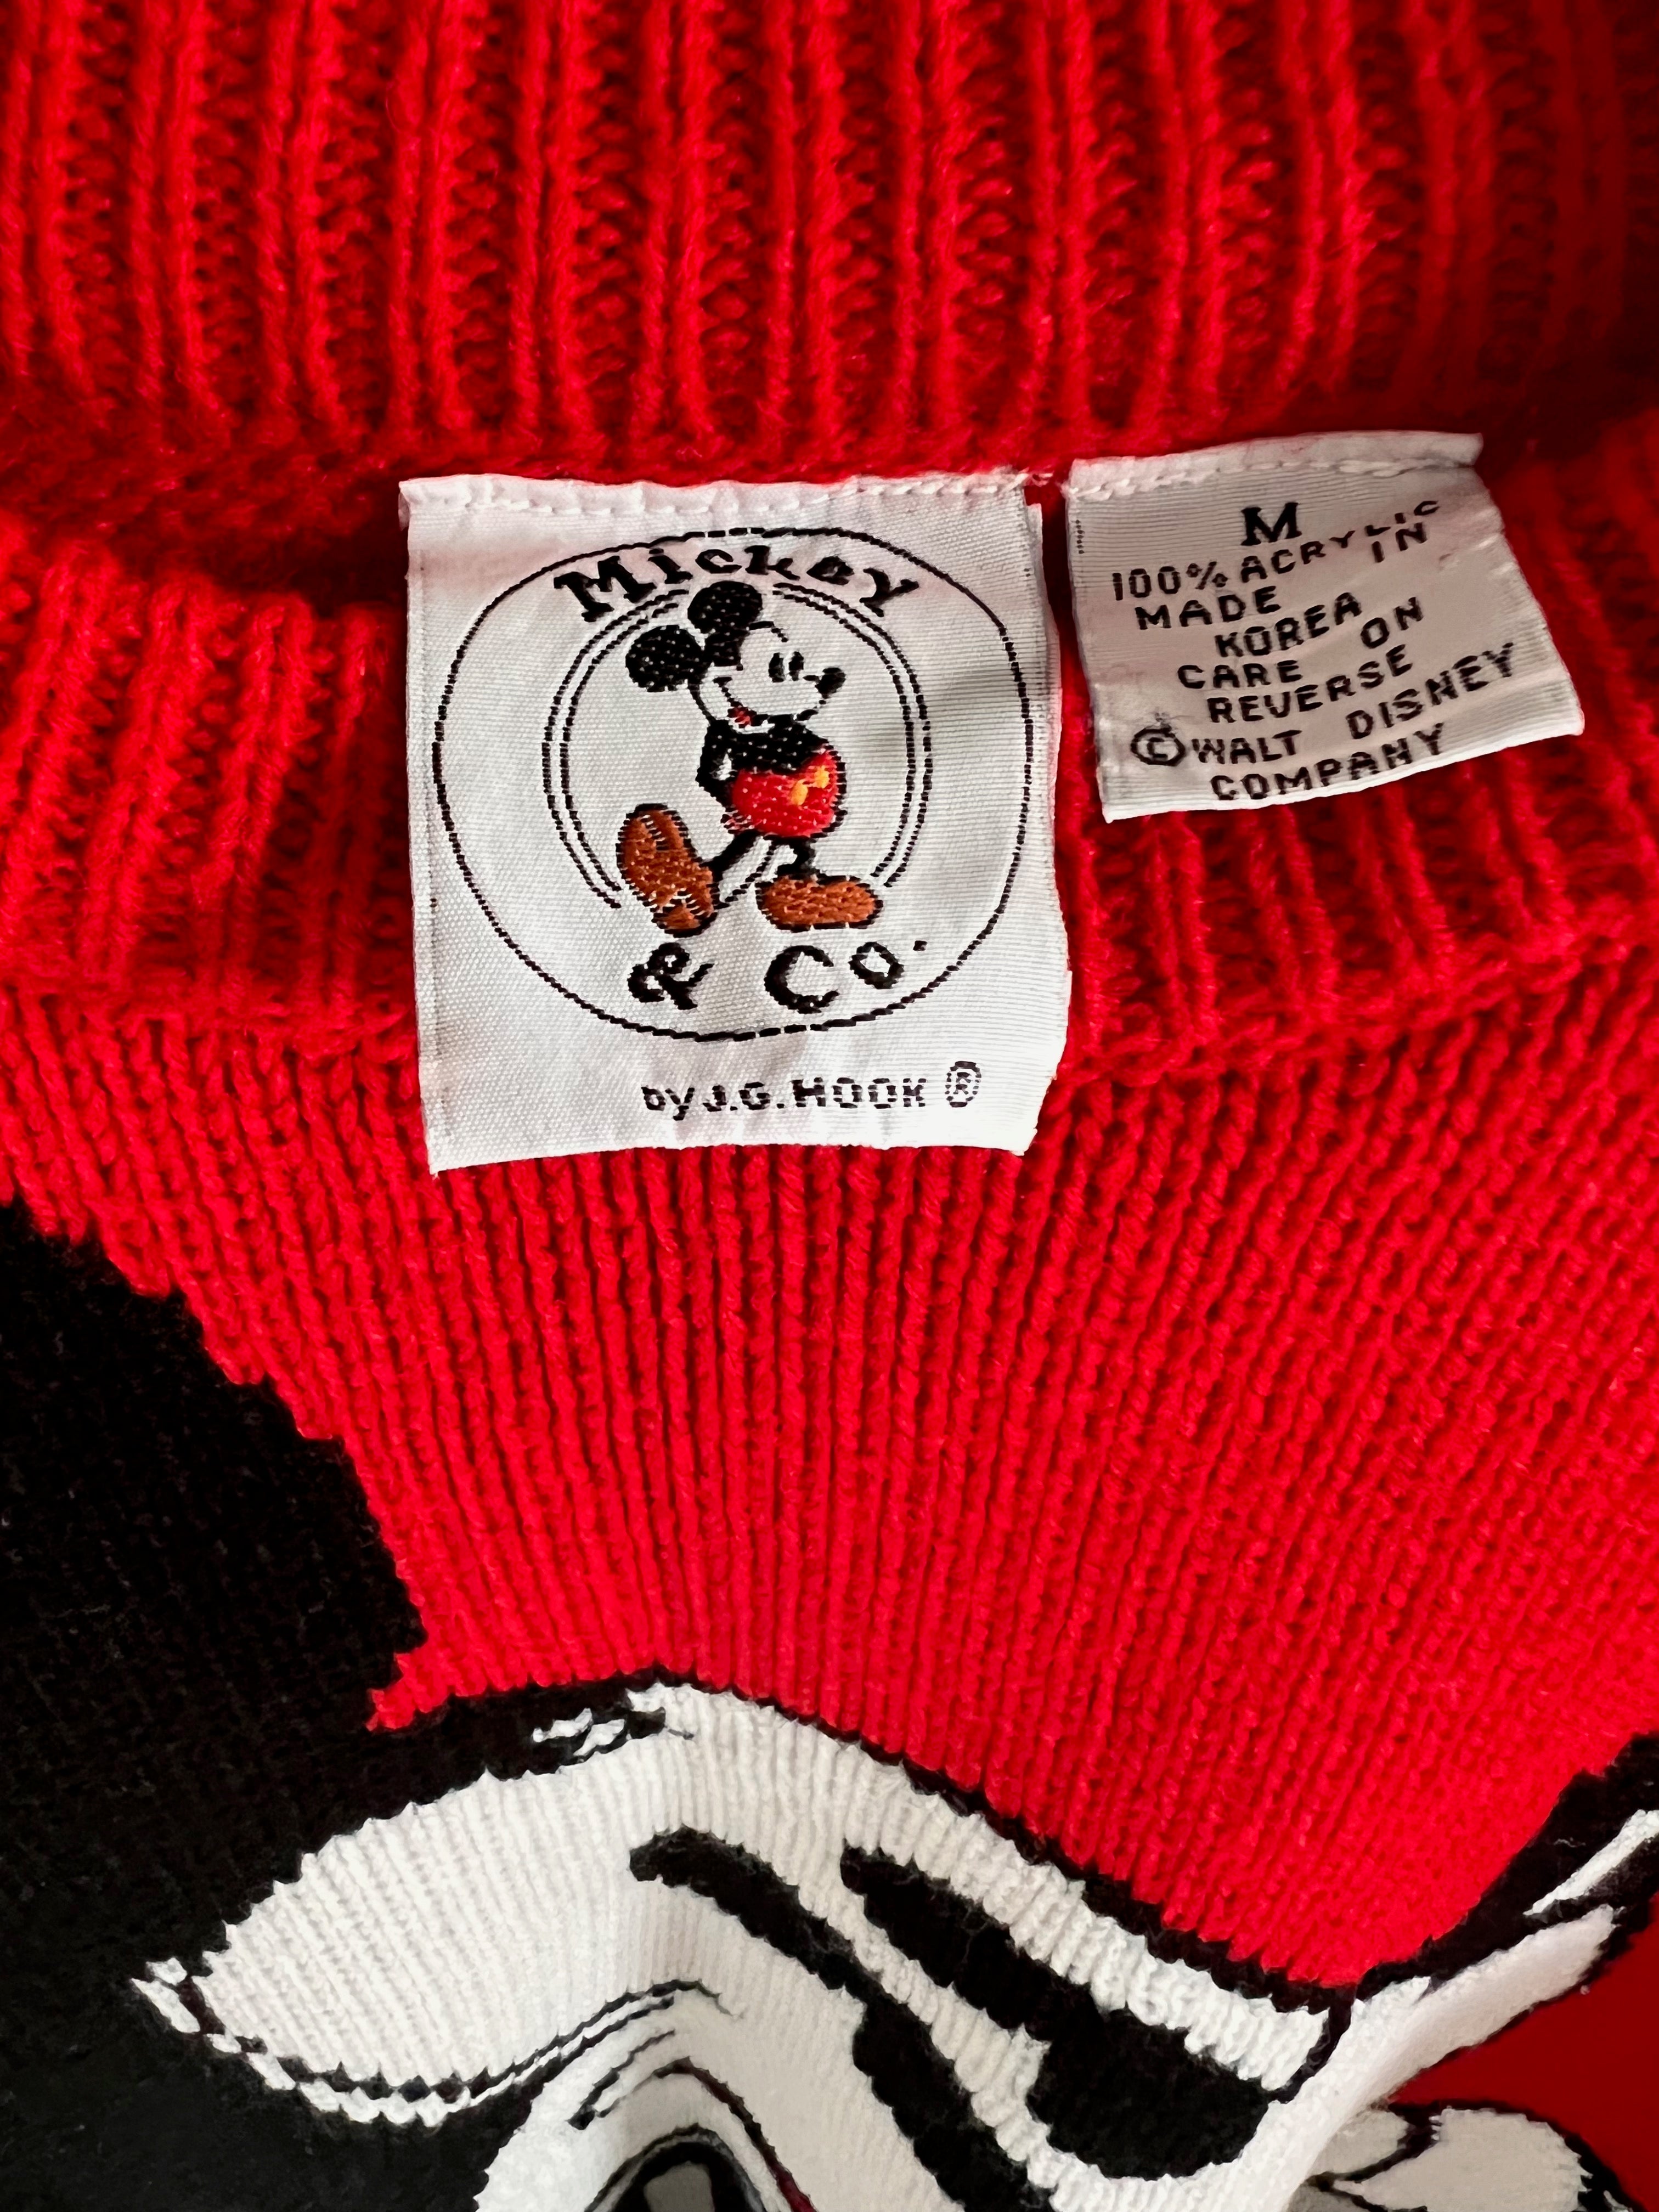 Vintage Mickey & Co. by J.G. Hook Mickey Mouse Knitted Sweater ...